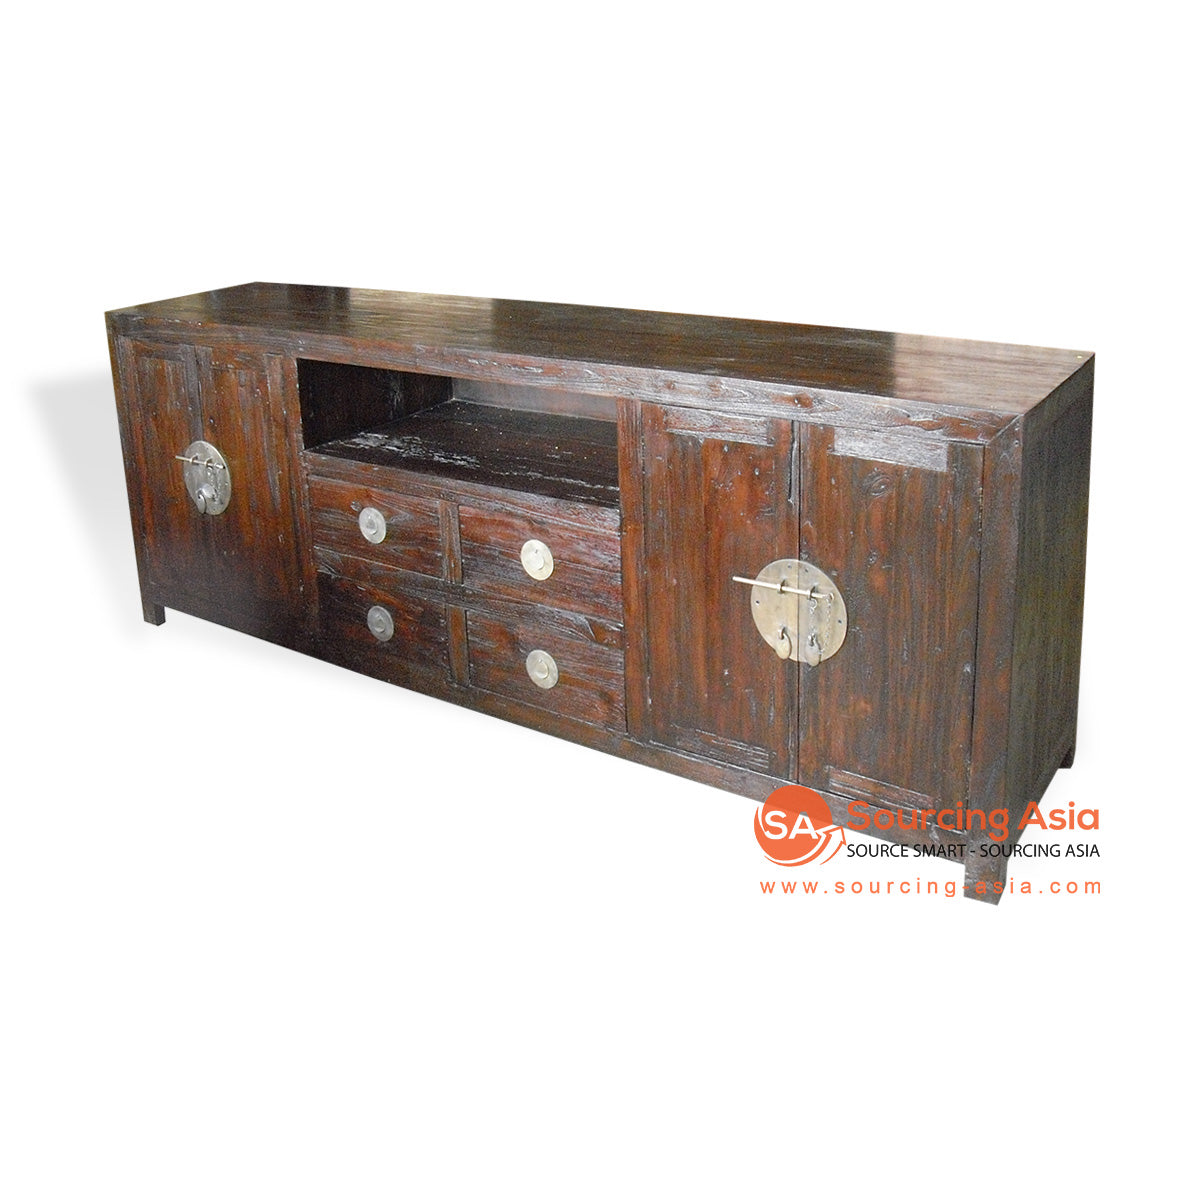 KYT-SPGP001 CHOCOLATE RECYCLED TEAK WOOD FOUR DOORS AND FOUR DRAWERS CHINESE RUSTIC ENTERTAINMENT UNIT